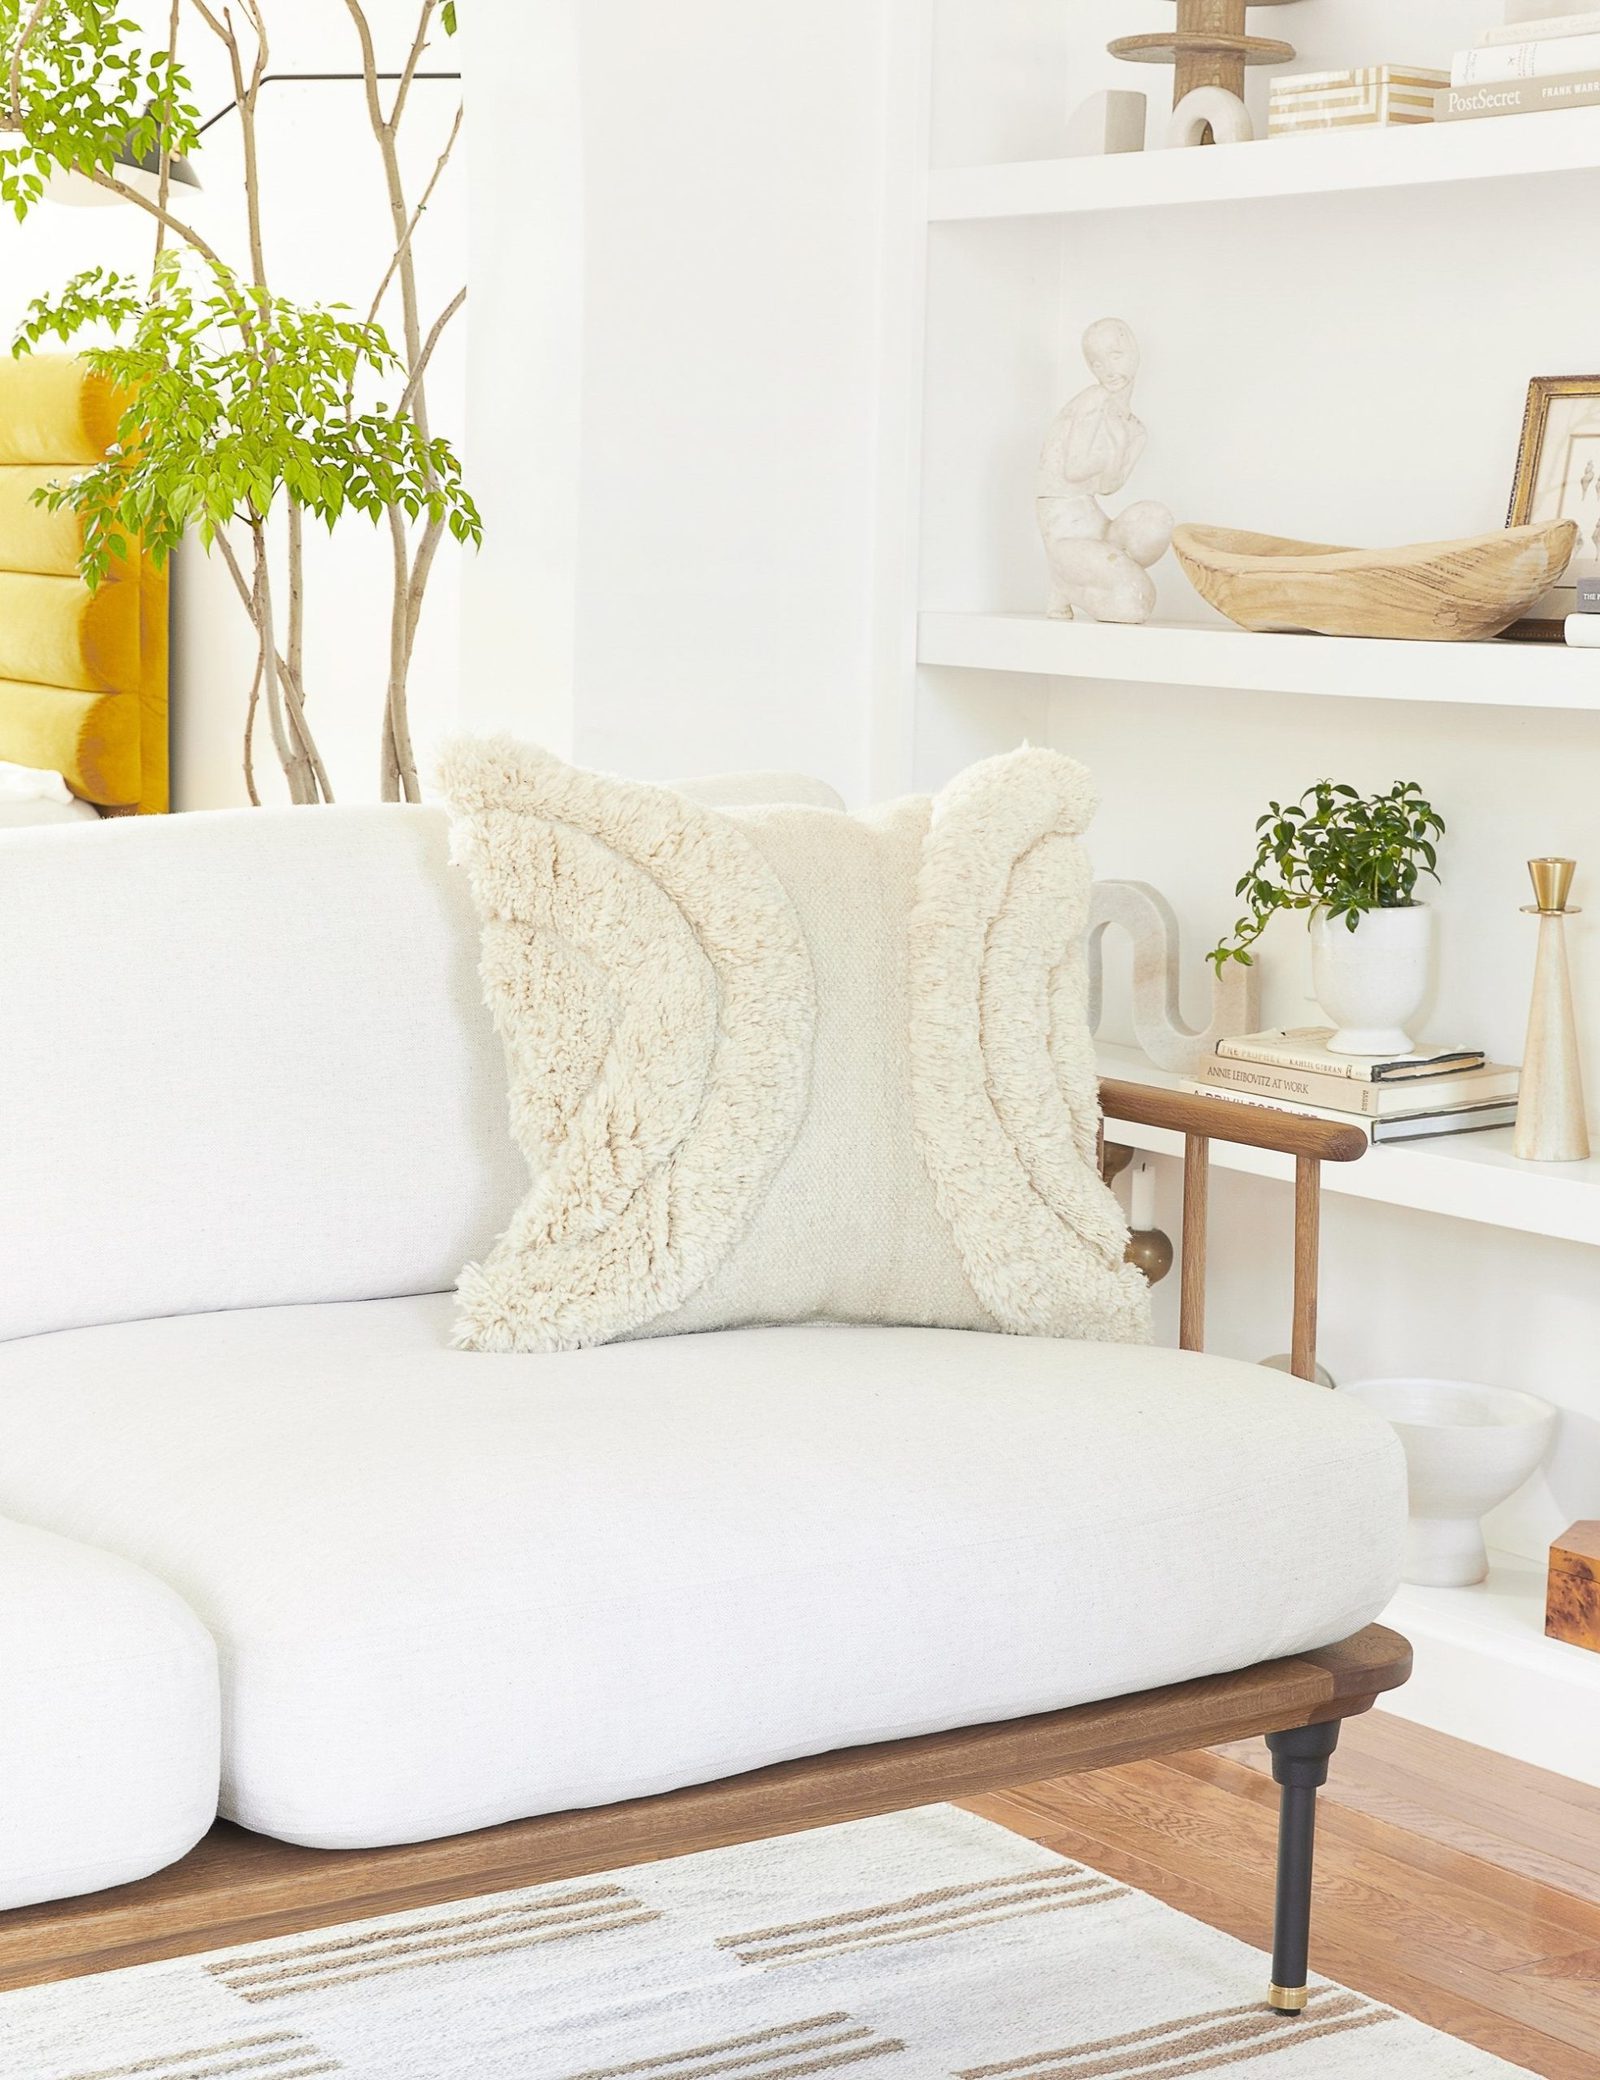 Swap Out Throw Pillows for a New Look